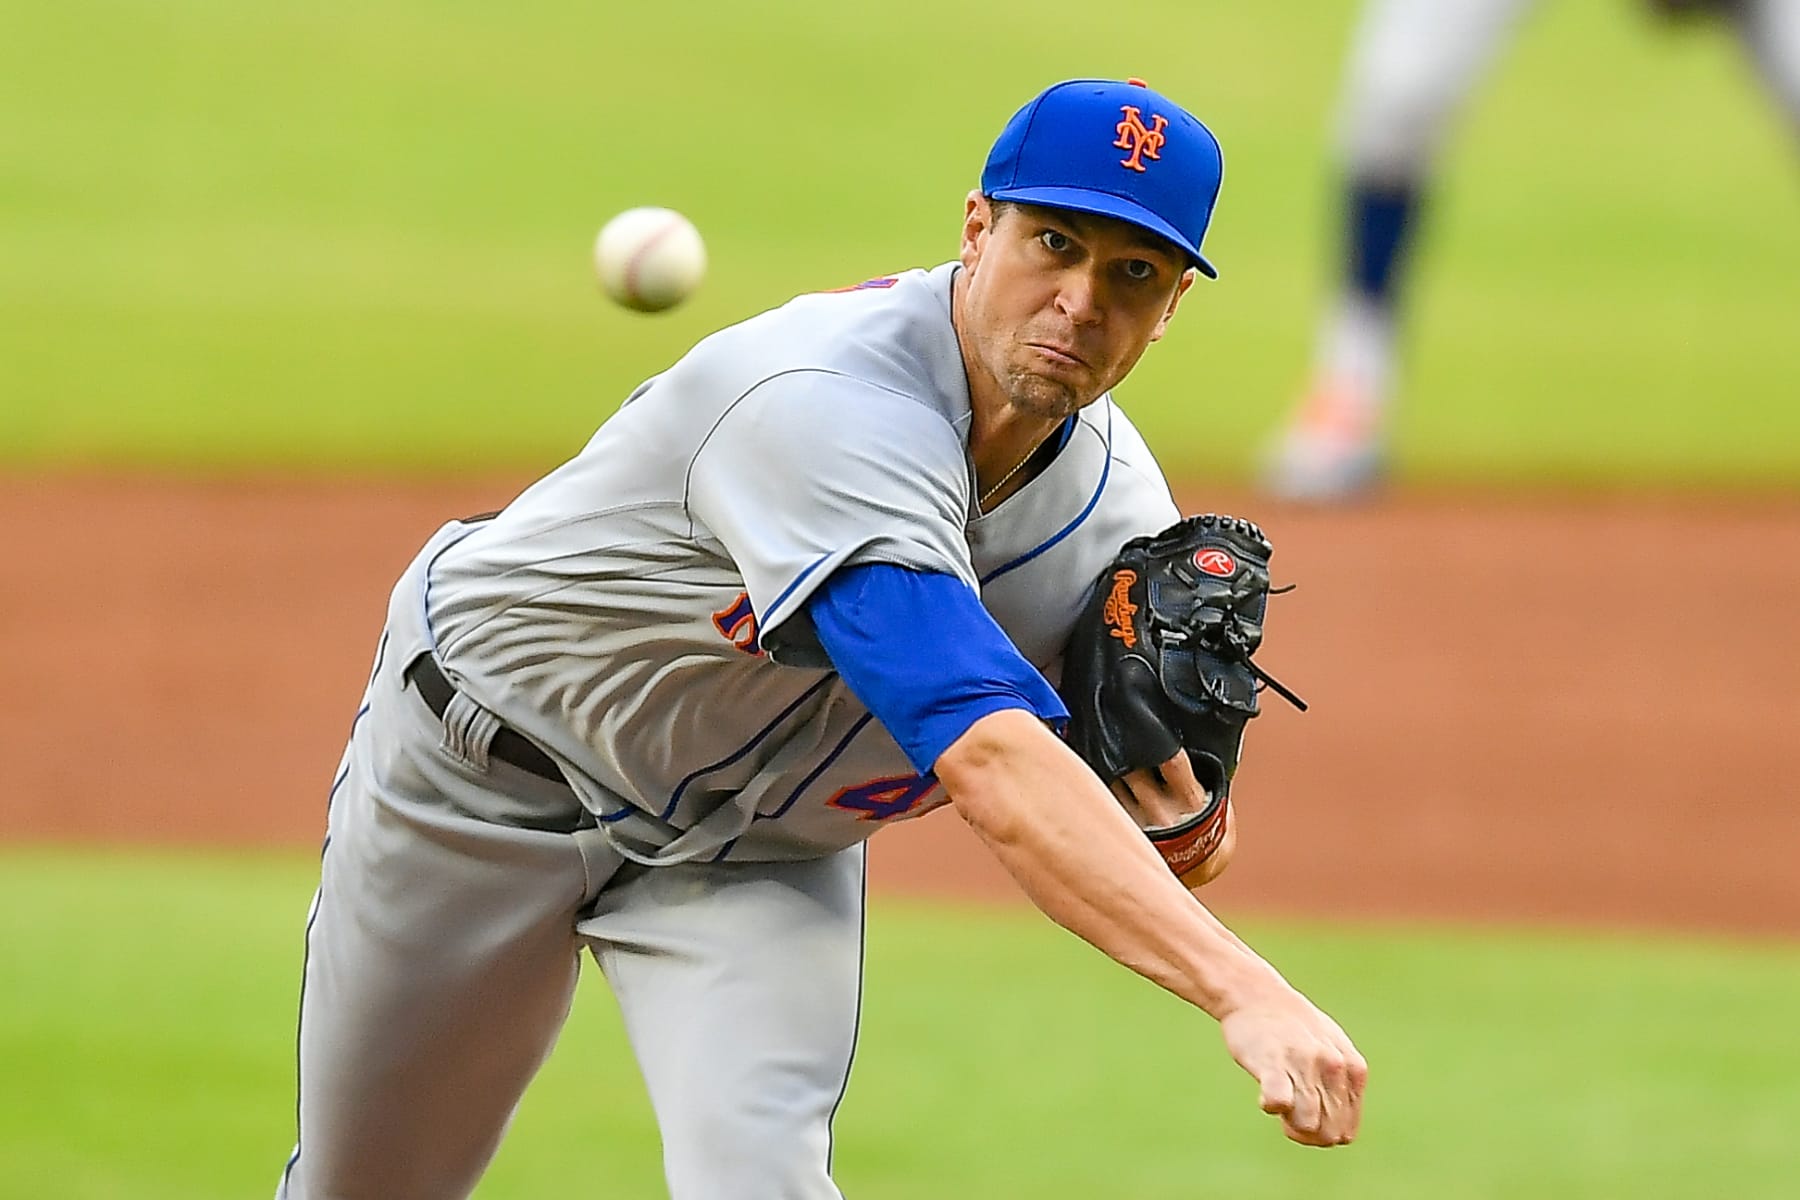 Rangers sign free-agent ace Jacob deGrom to 5-year, $185M US